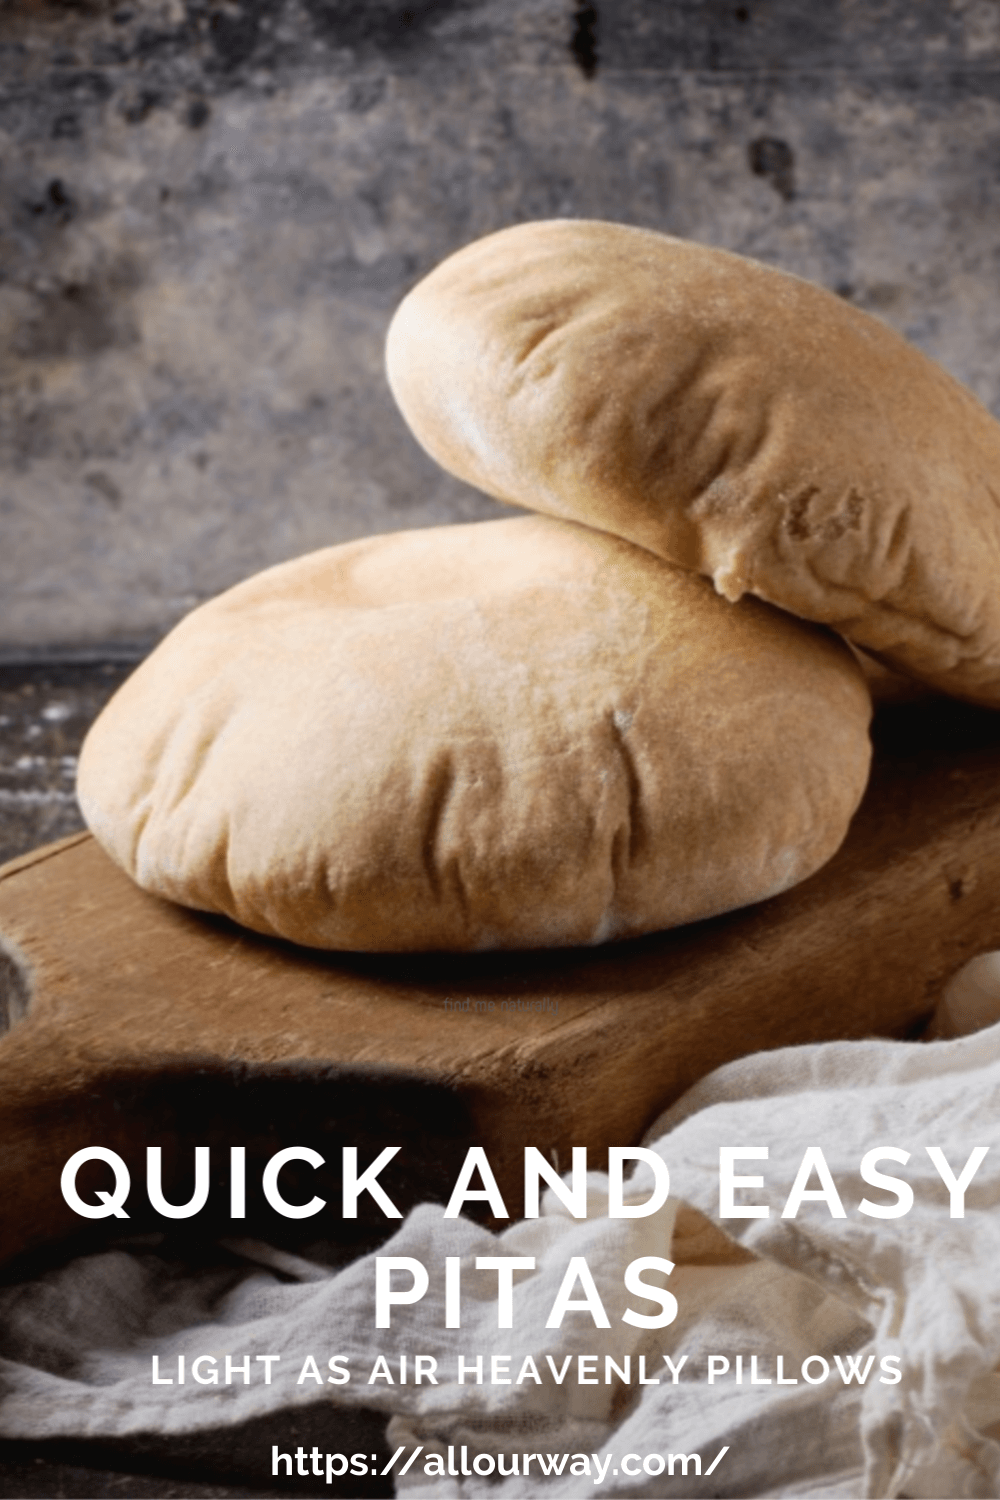 Pita bread is a soft as pillow yeast sandwich bread you can split and fill. It is very easy and quick to make. Once you try the homemade you will not buy the store bought. Great flatbread to eat as is or split them in two and stuff. Pitas make fantastic sandwiches.